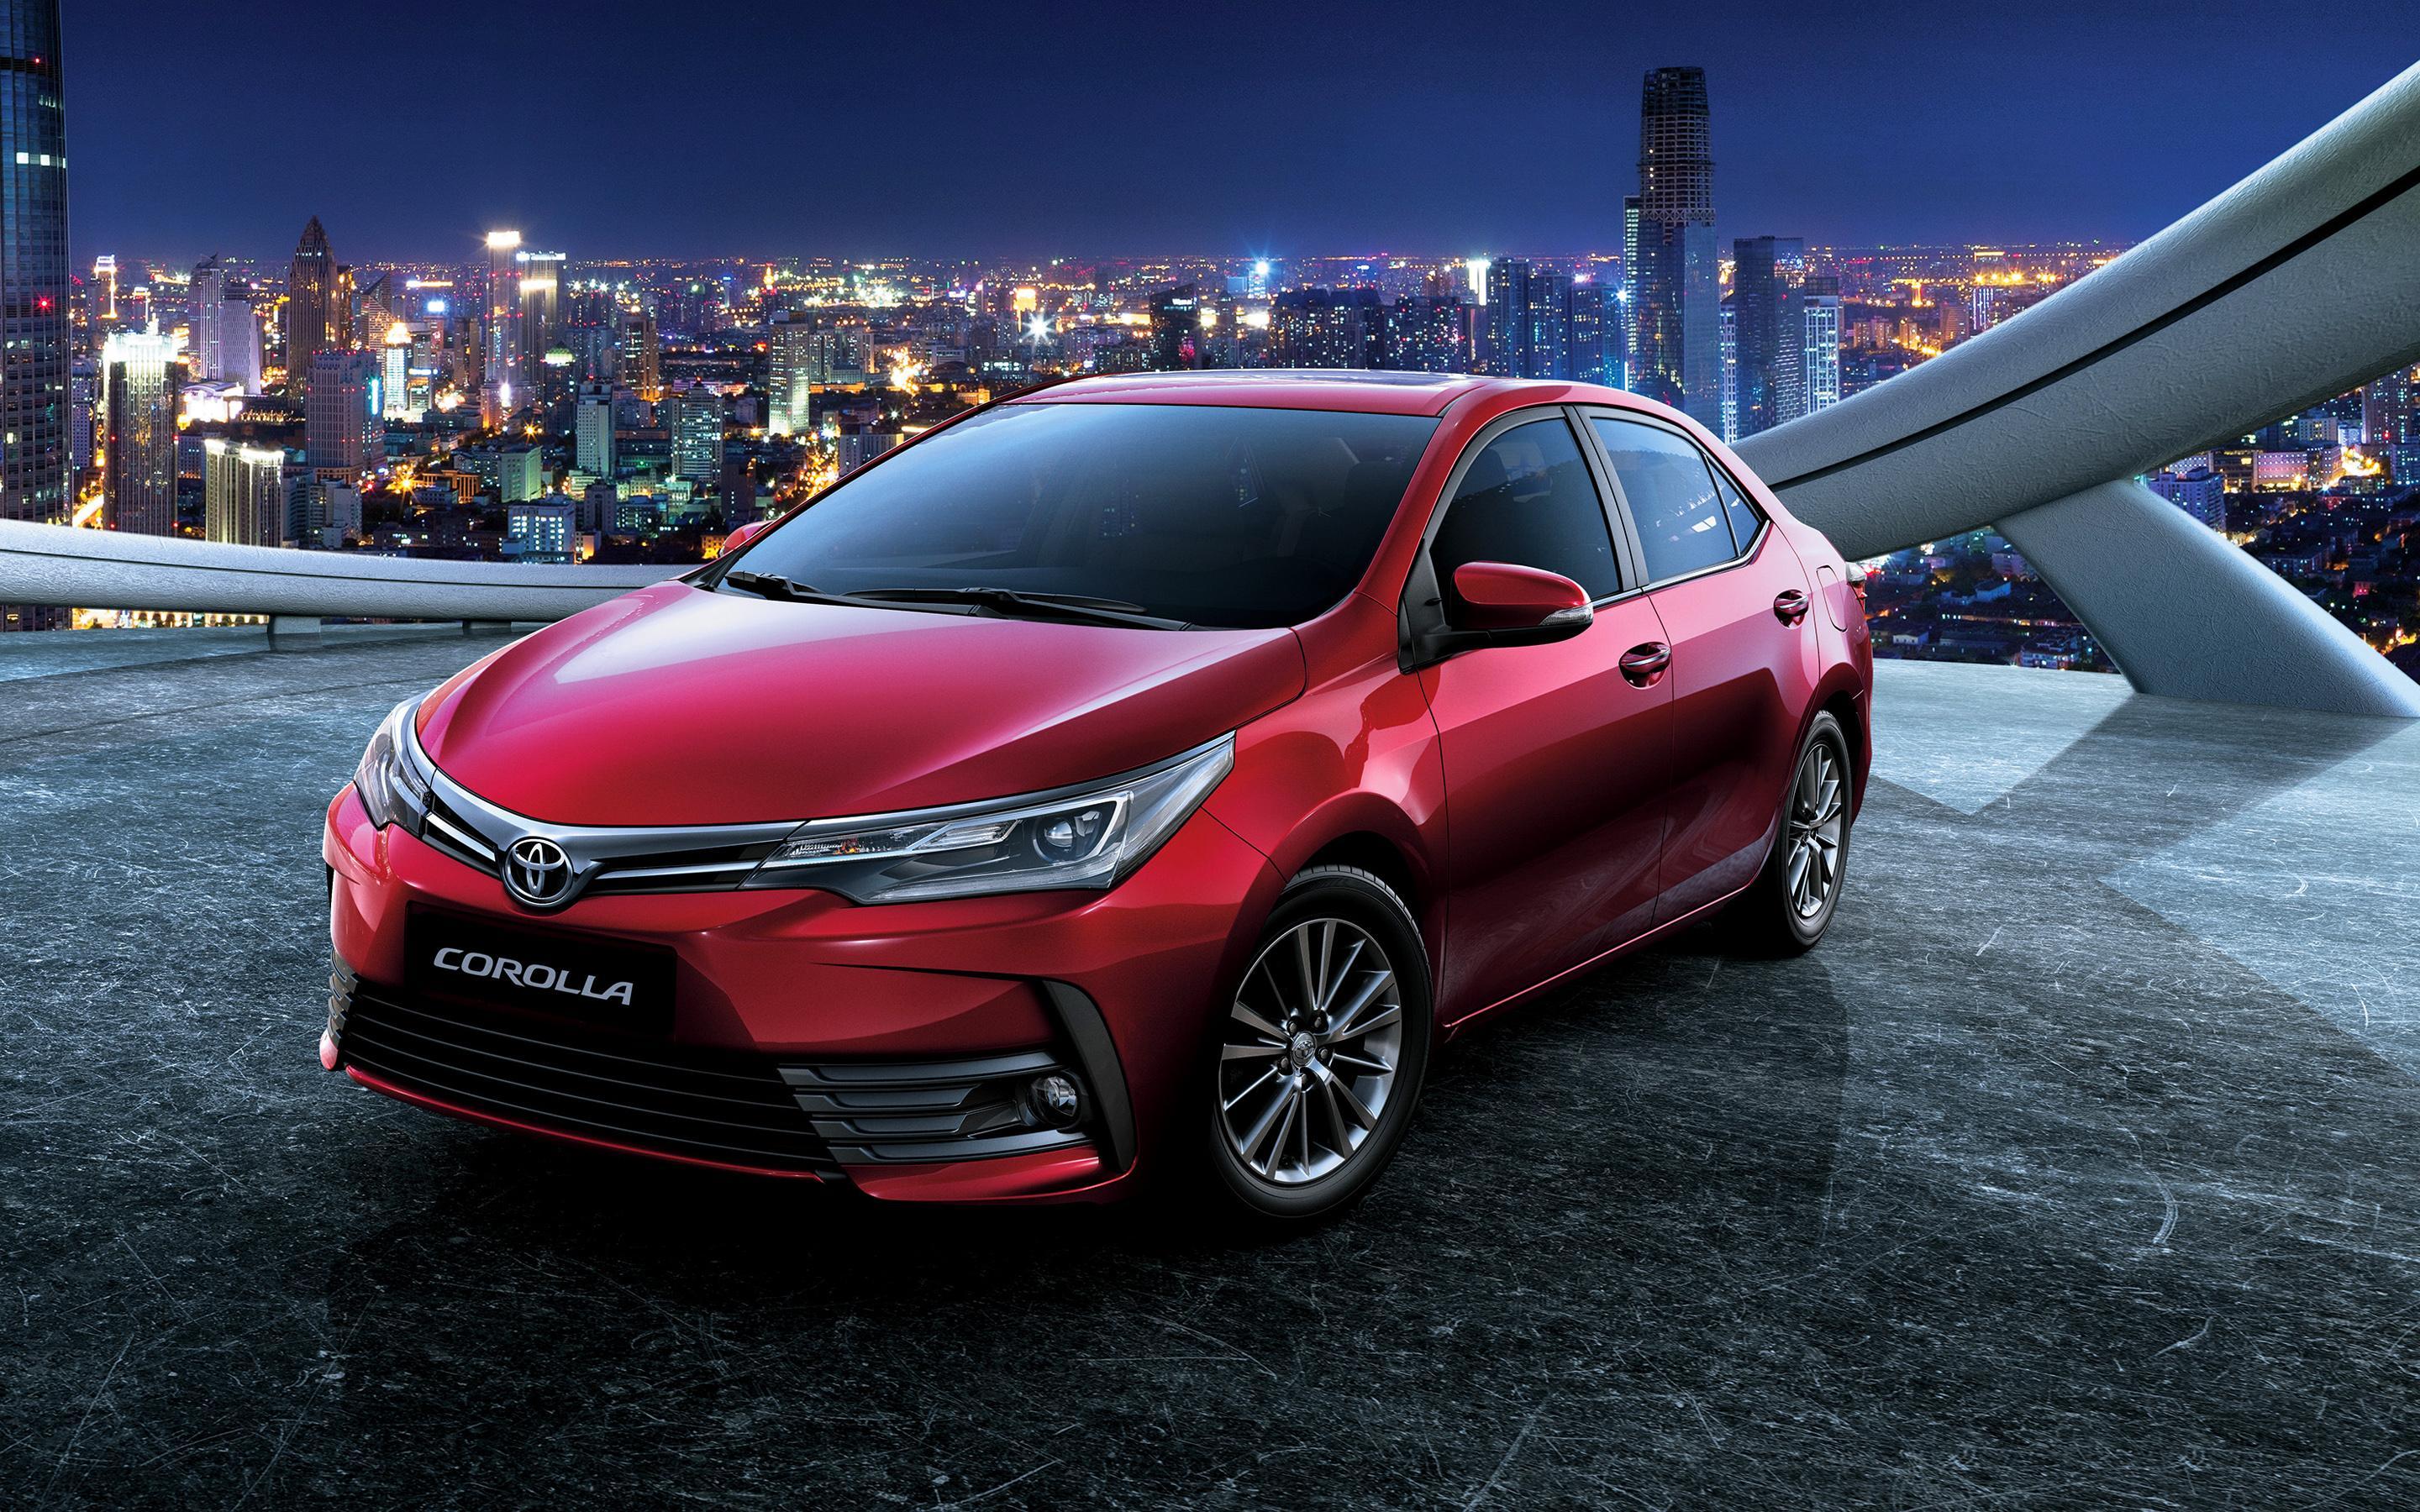 Download wallpaper Toyota Corolla, 2018 cars, night, red